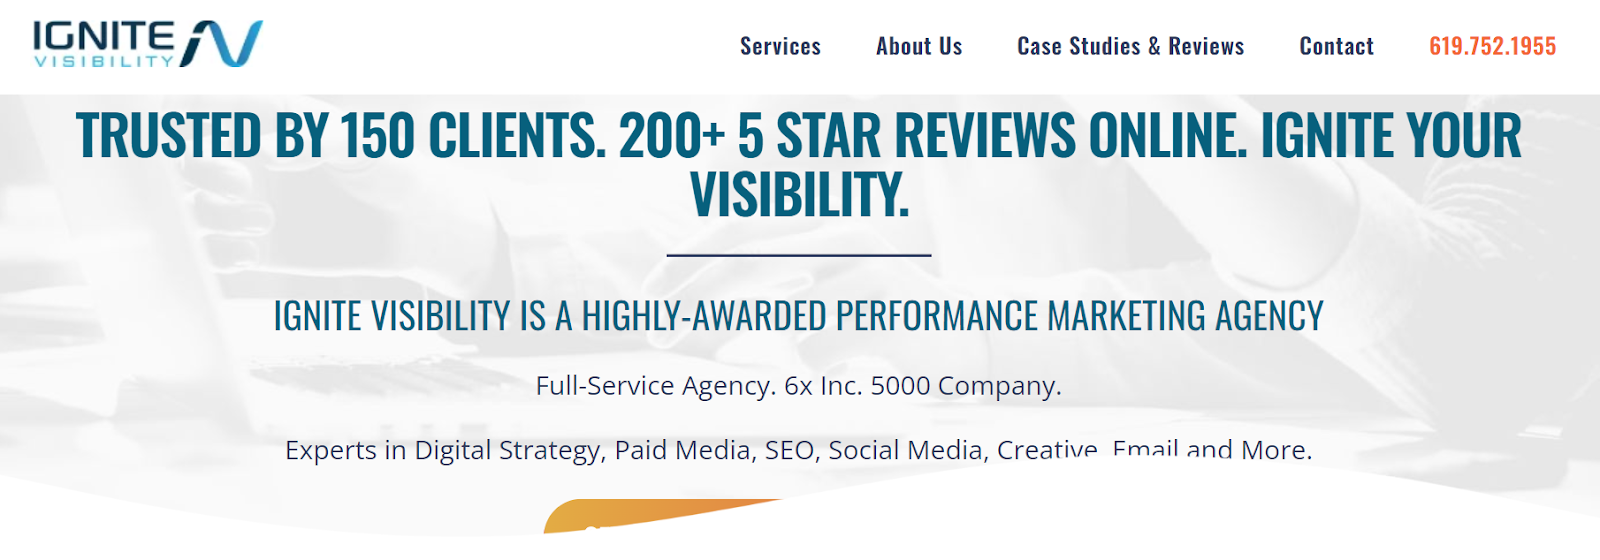 IgniteVisibility listed as one of the 15 Best SEO Companies for Multi-Unit Businesses
